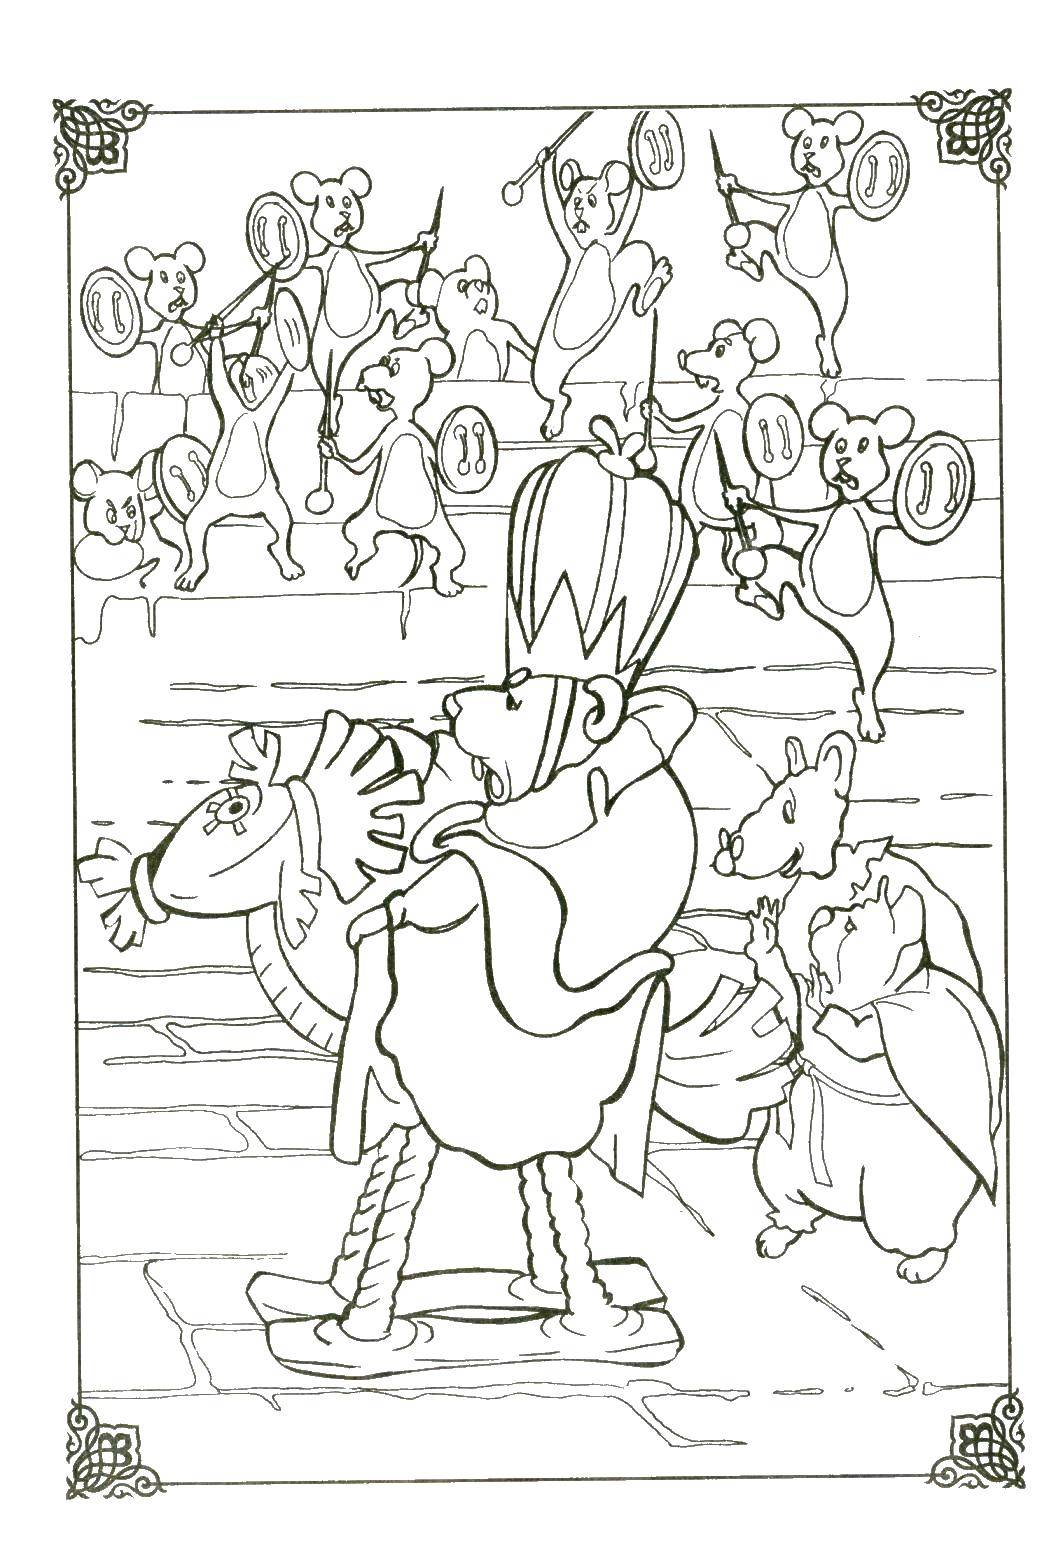 Coloring The mouse king. Category the Nutcracker. Tags:  the Nutcracker, rat.